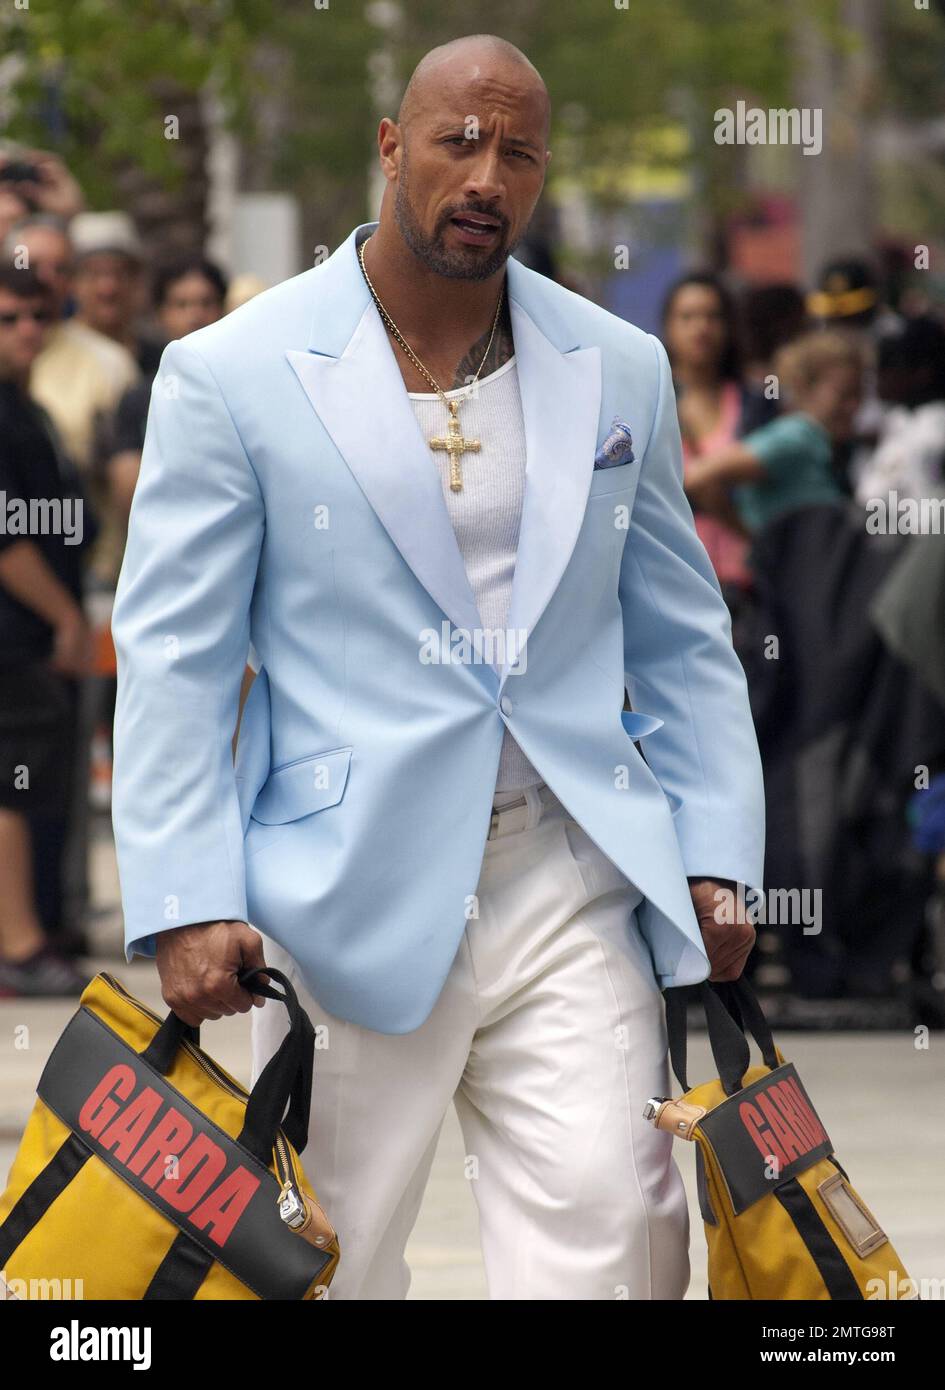 Wearing a baby blue colored jacket, white shirt, white pants, white shoes  and a crucifix necklace, Dwayne 'The Rock' Johnson is seen on set shooting  scenes for his up coming new film "